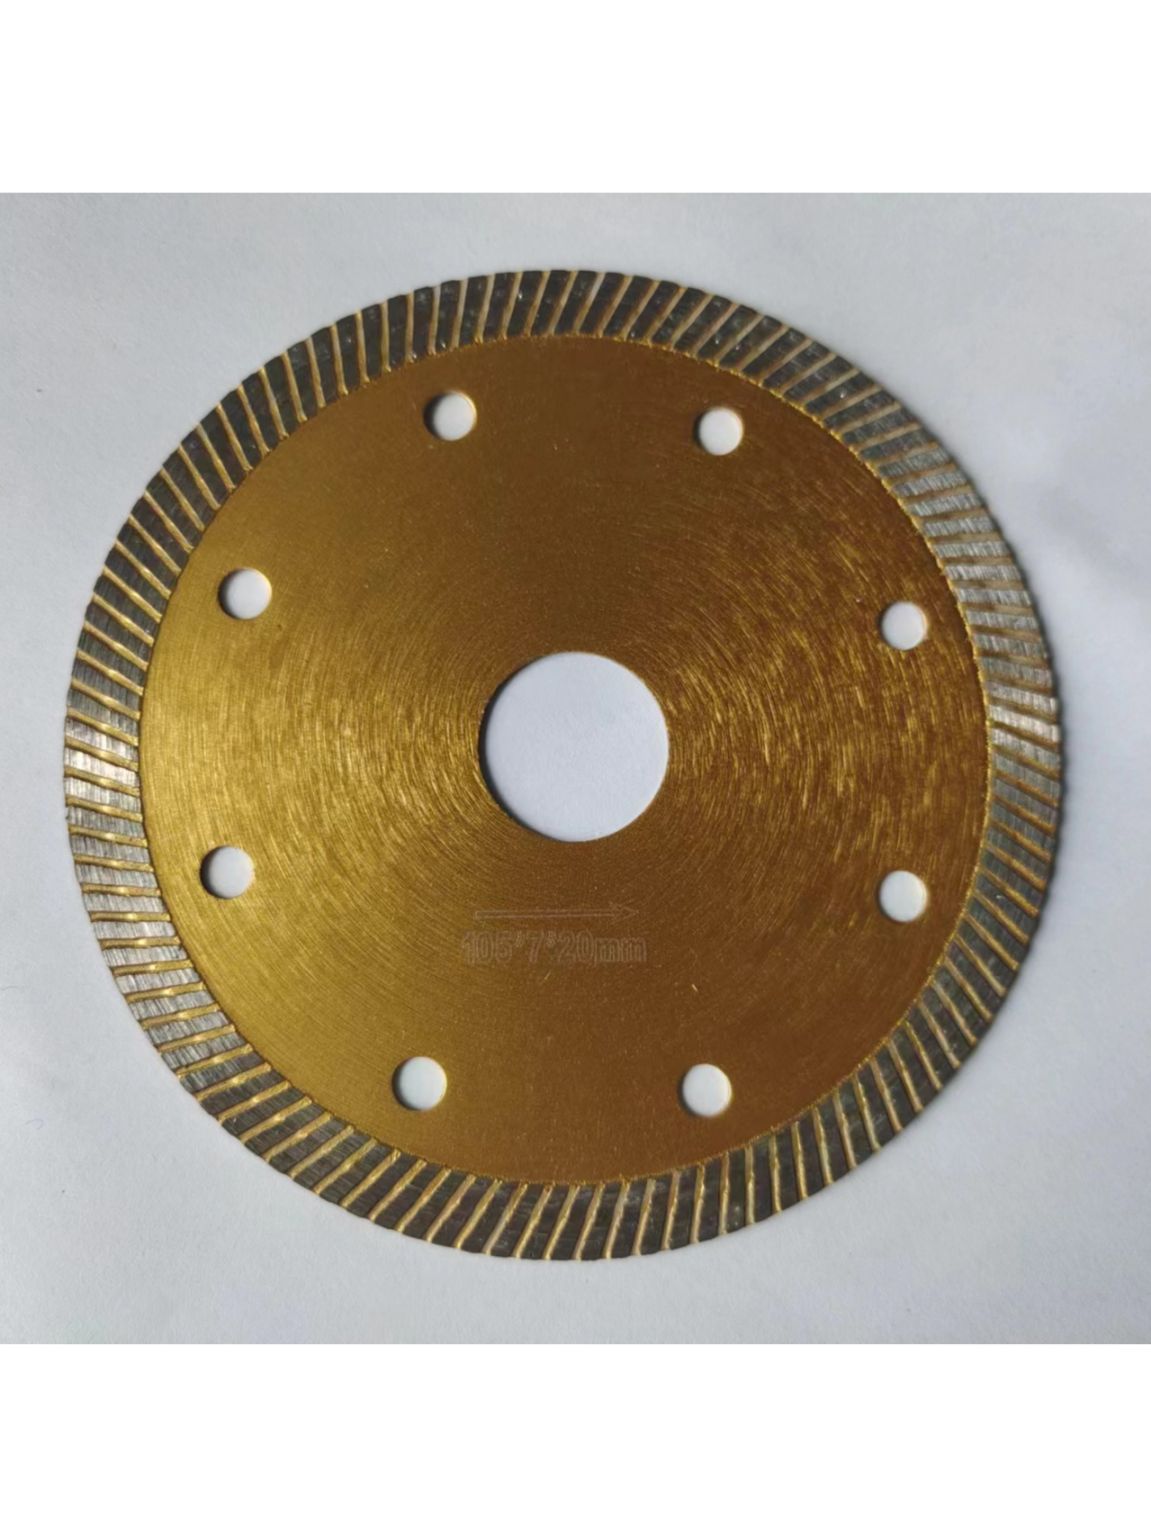 Tansy Yan on LinkedIn: Gold Hot-pressed saw blade——Cutting tile floor